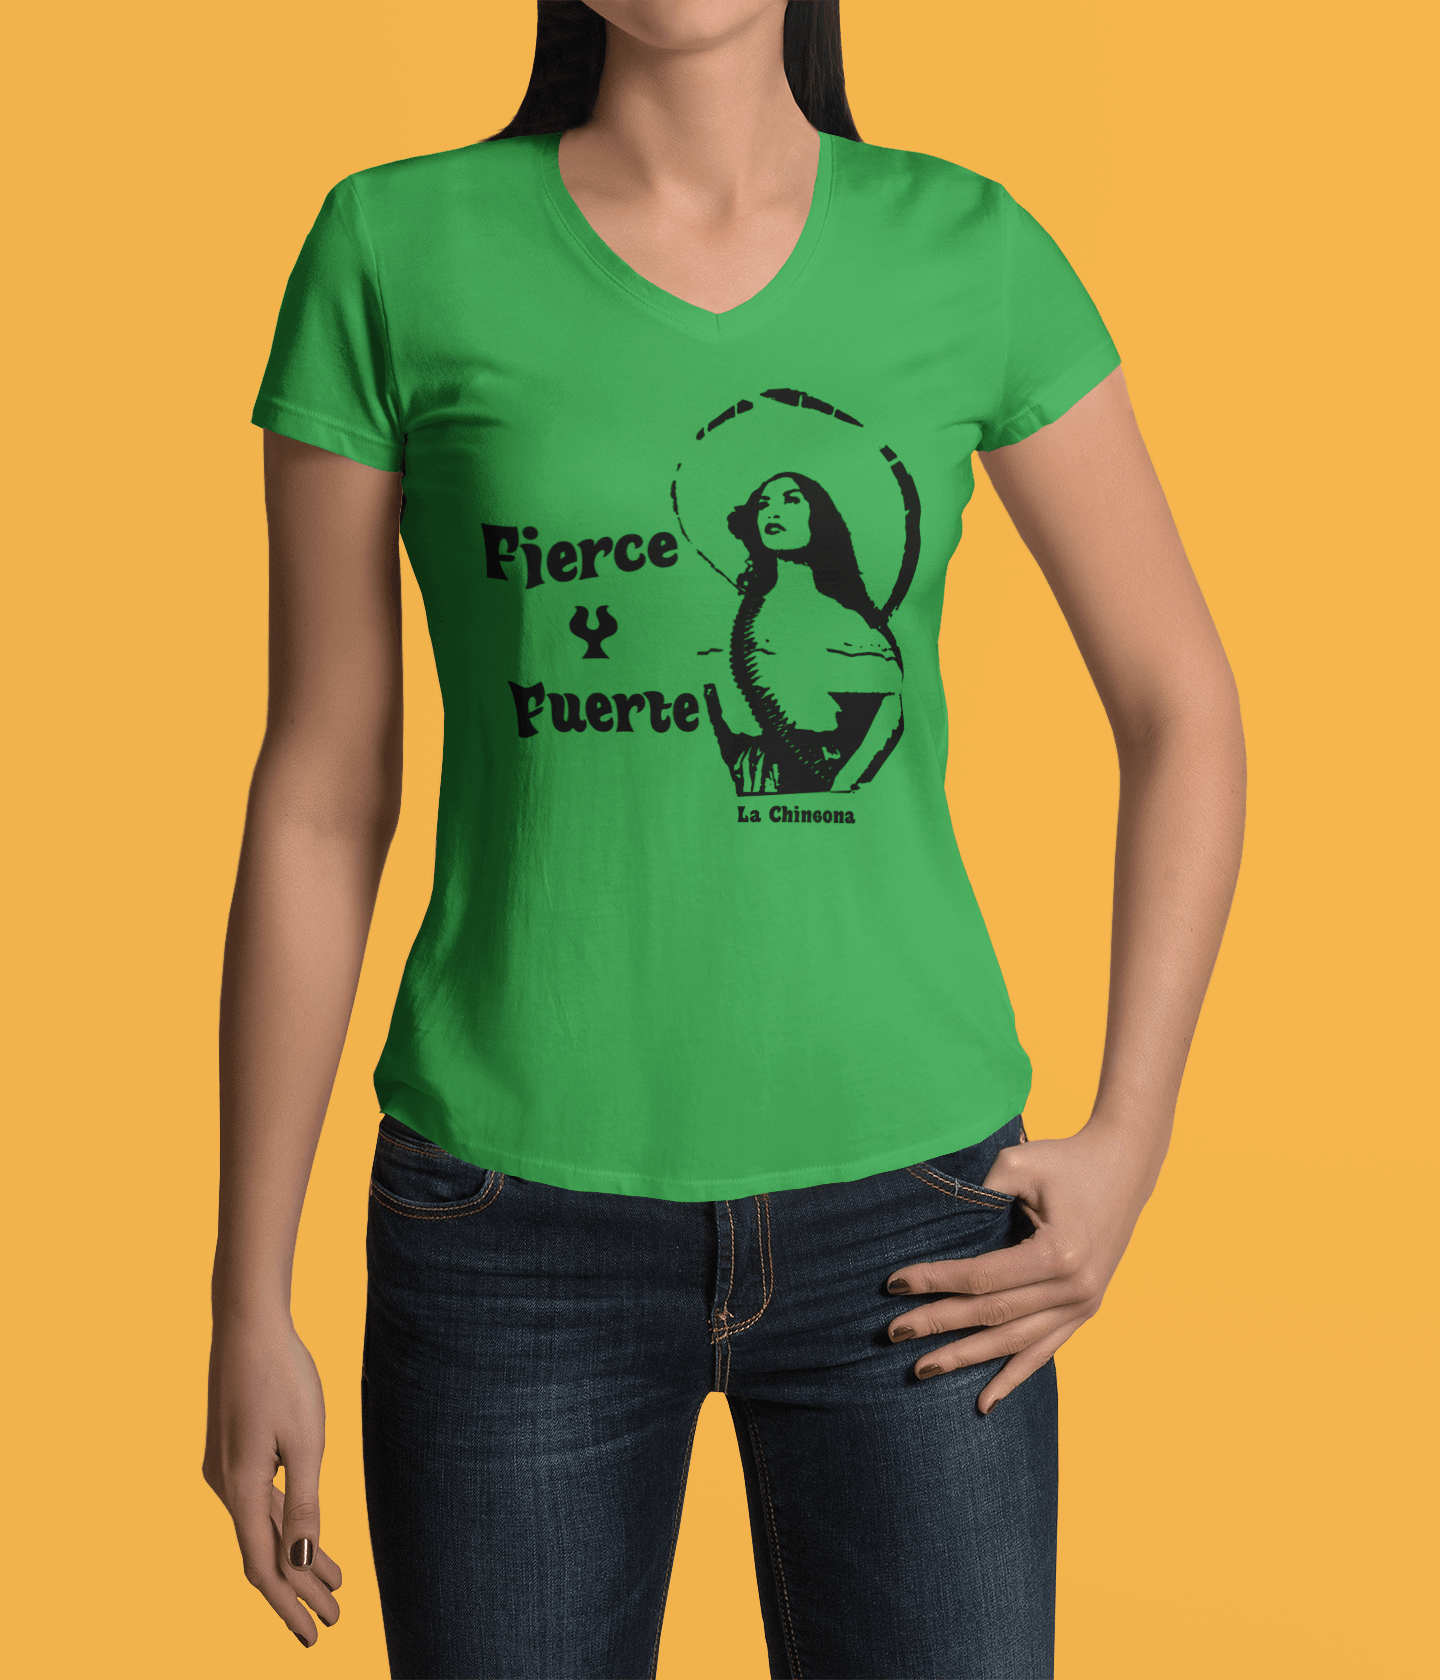 Green V-neck t-shirt with the text, "Fierce Y Fuerte La Chingona" in black ink and a Mexican woman with a sombreo and bullet strap also in black ink. This sassy tee comes in sizes small thru 3XL. It is available at www.sanchezhere.com